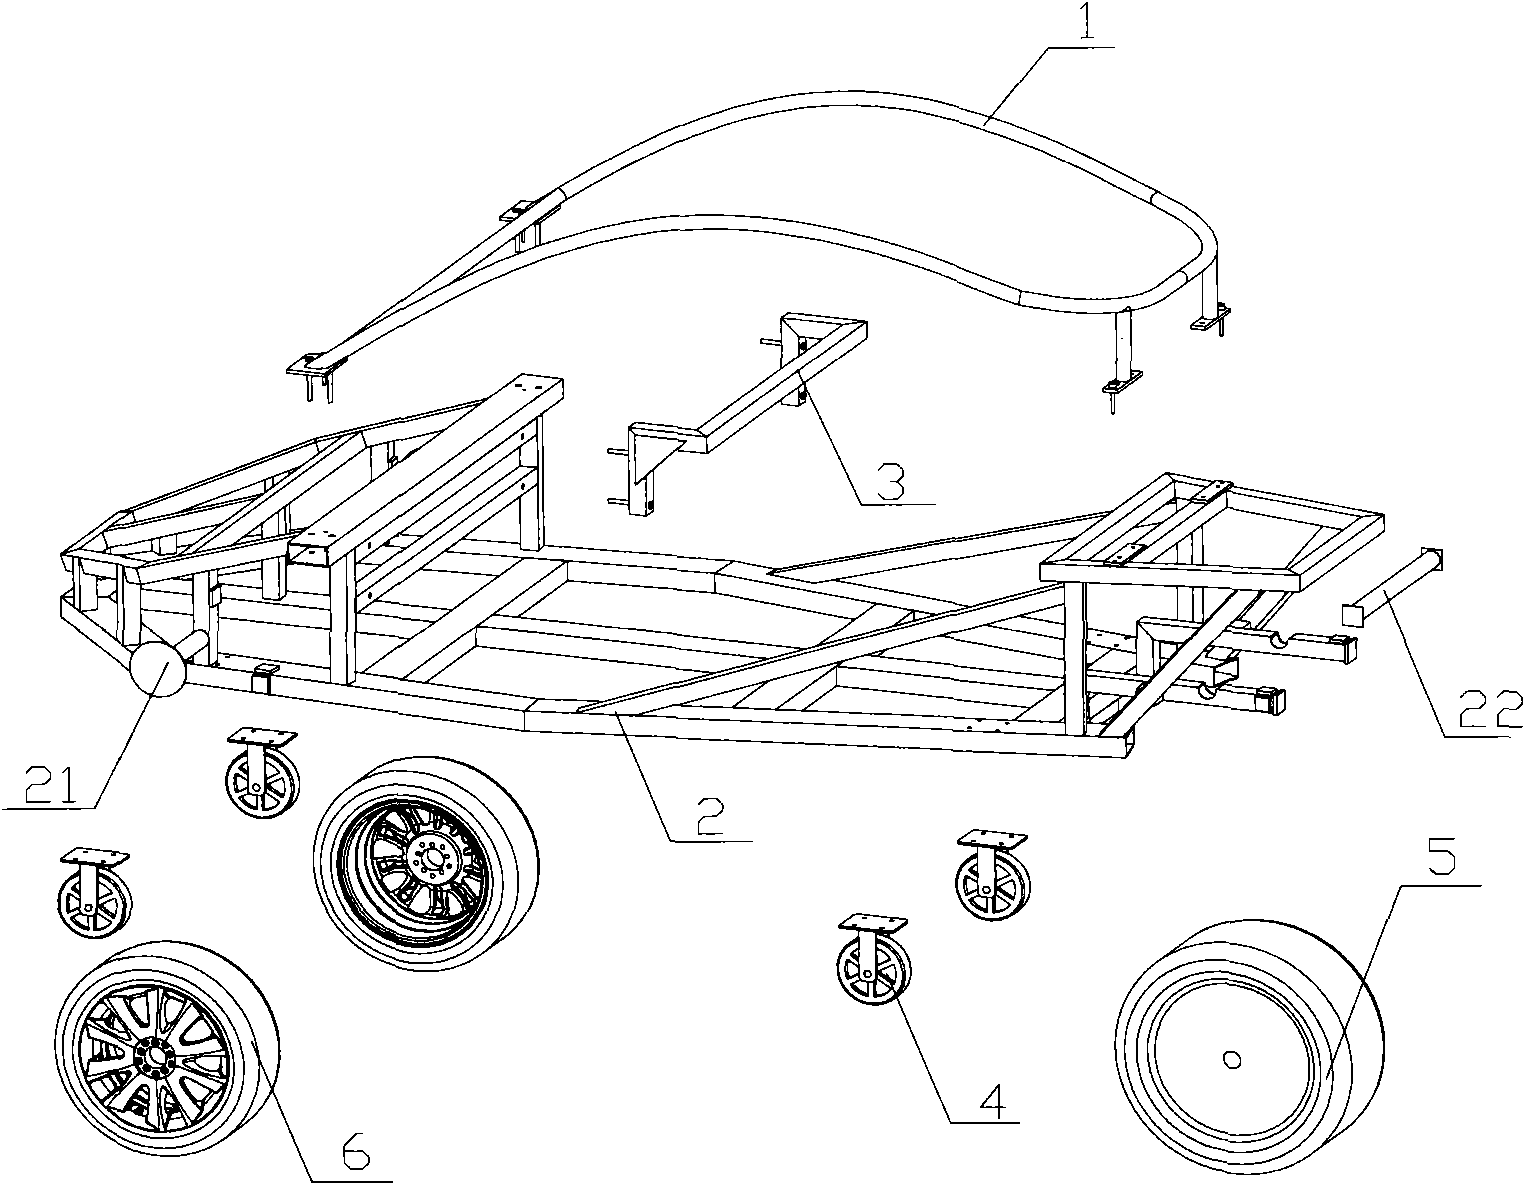 Clay model bearing frame for vehicles